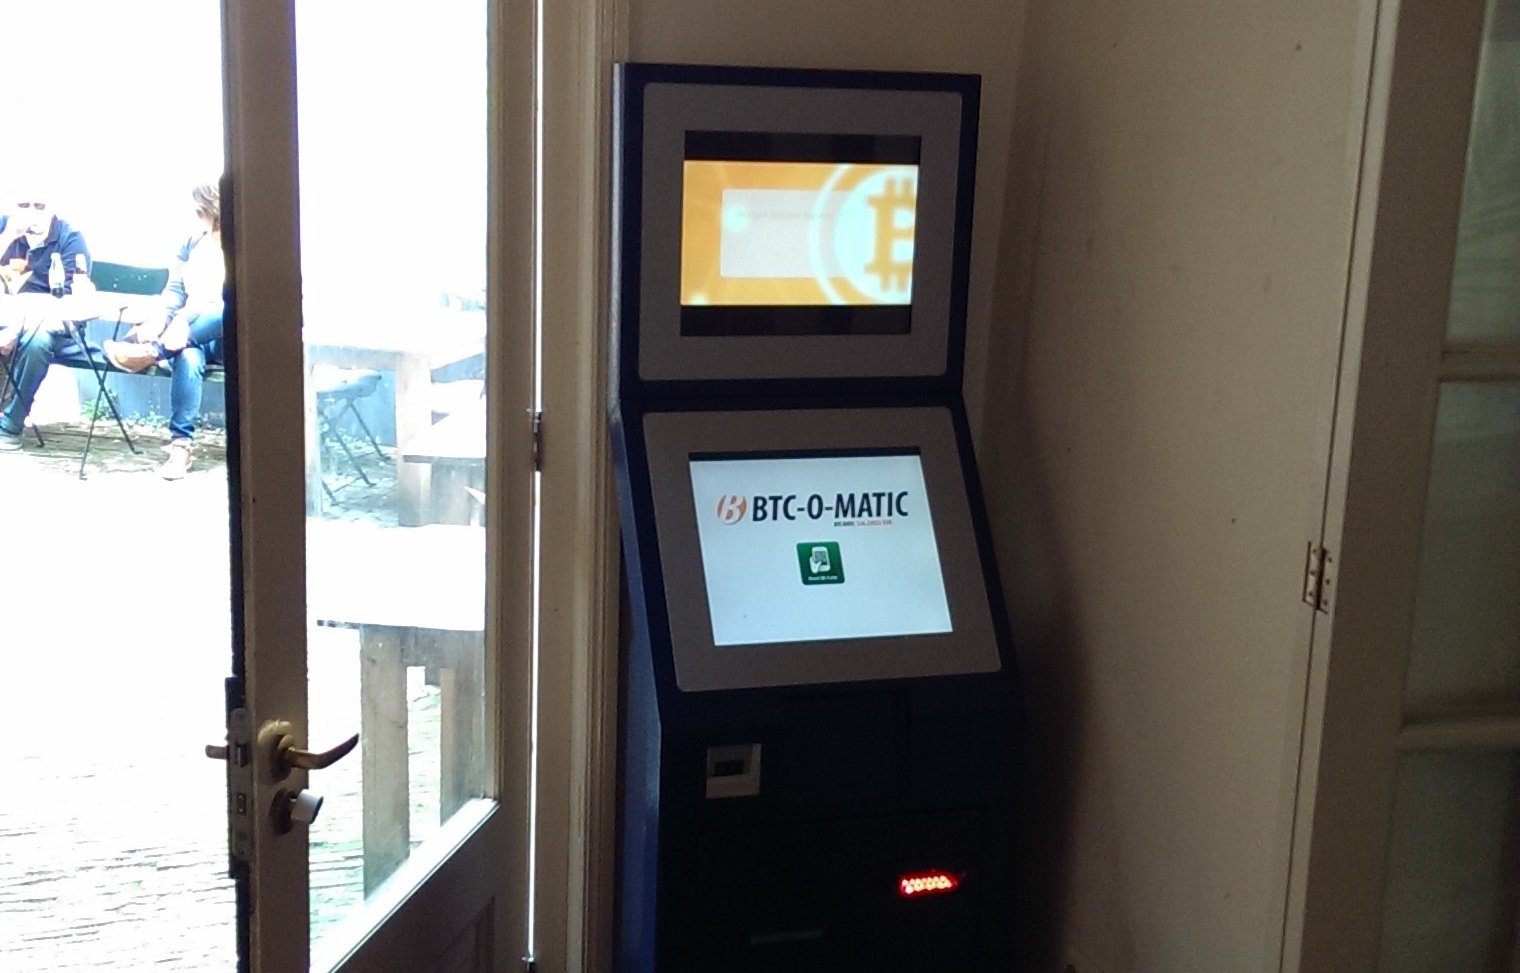 Bitcoin Atm Fever A List Of 8 Different Machines - 